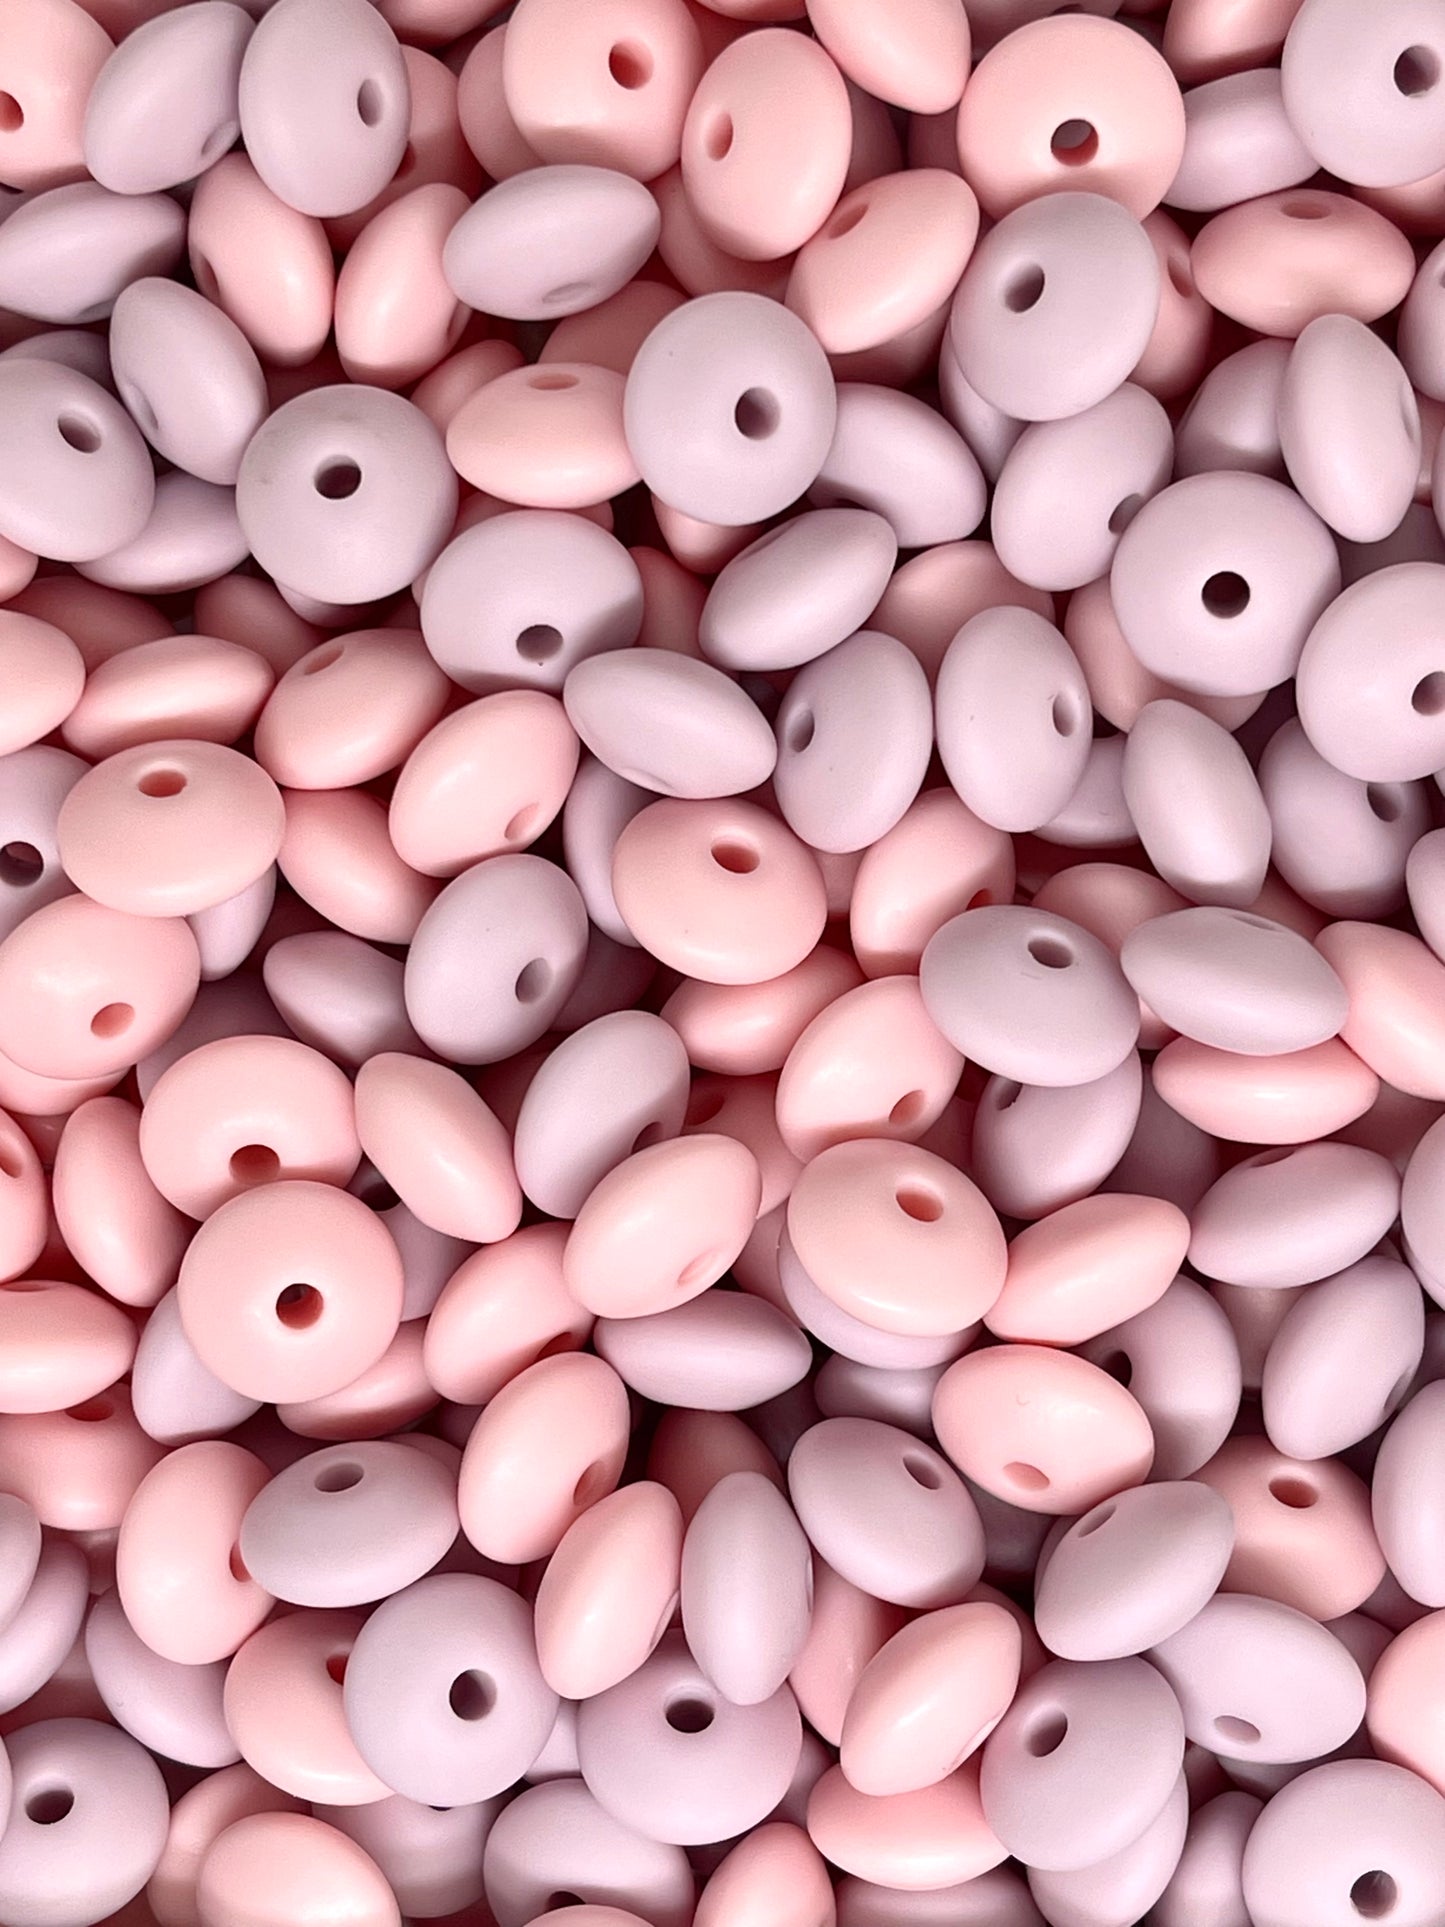 Lentil Silicone Beads - Mix 4